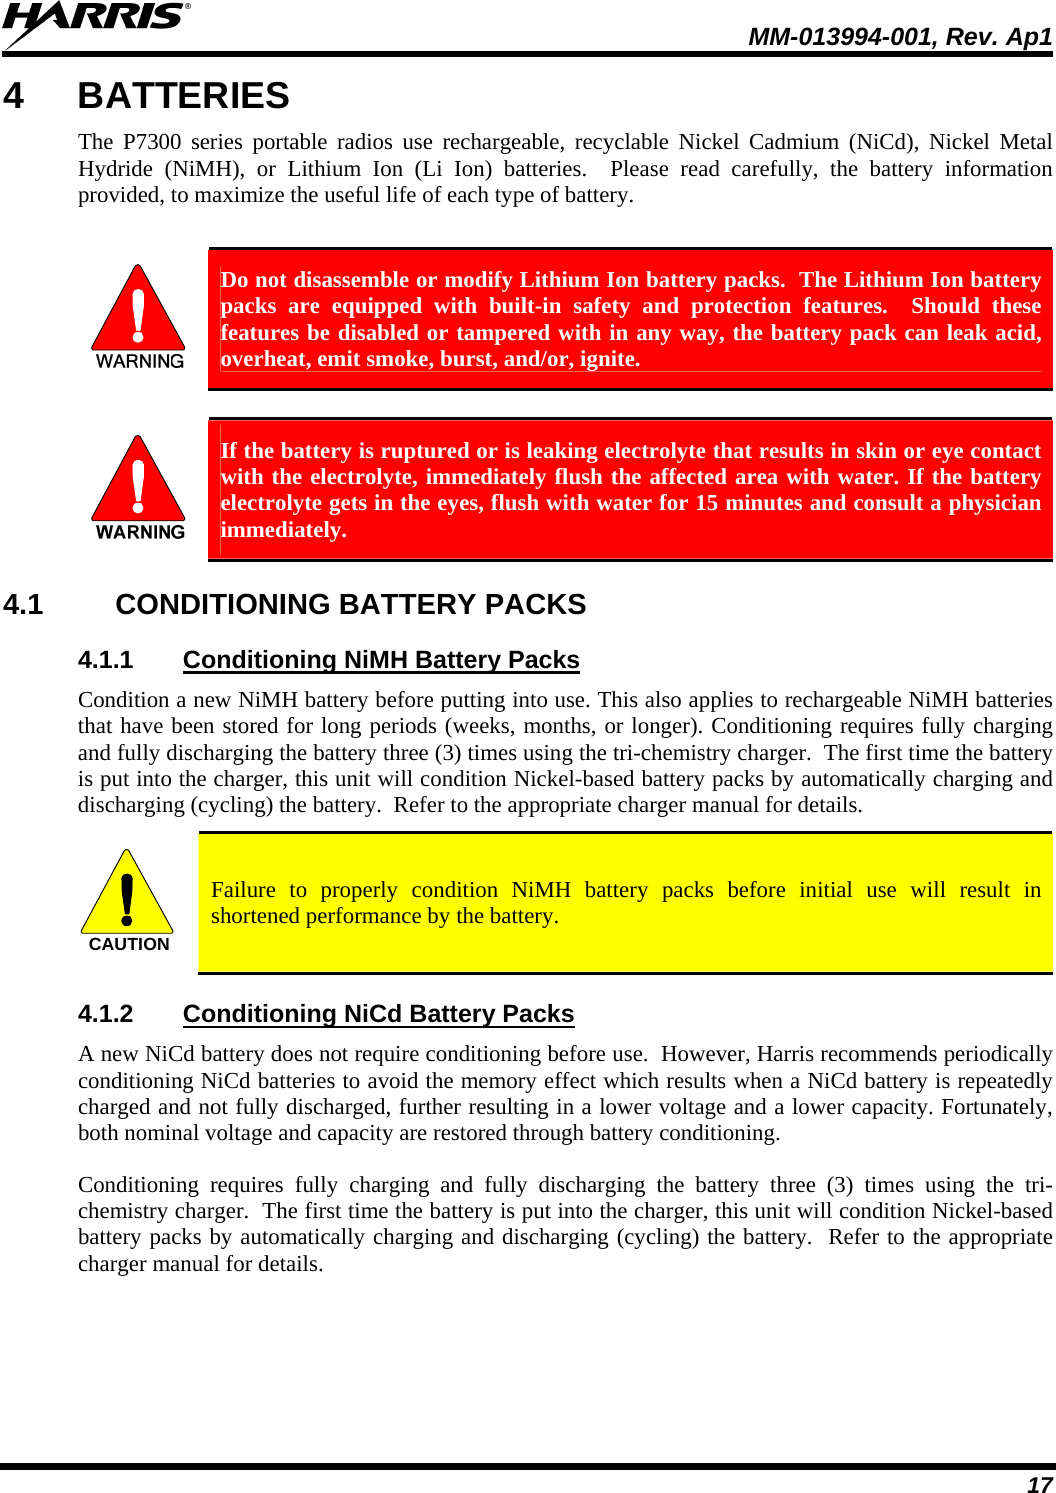  MM-013994-001, Rev. Ap1 17 4 BATTERIES The P7300 series portable radios use rechargeable, recyclable Nickel Cadmium (NiCd), Nickel Metal Hydride (NiMH), or Lithium Ion (Li Ion) batteries.  Please read carefully, the battery information provided, to maximize the useful life of each type of battery.   Do not disassemble or modify Lithium Ion battery packs.  The Lithium Ion battery packs are equipped with built-in safety and protection features.  Should these features be disabled or tampered with in any way, the battery pack can leak acid, overheat, emit smoke, burst, and/or, ignite.   If the battery is ruptured or is leaking electrolyte that results in skin or eye contact with the electrolyte, immediately flush the affected area with water. If the battery electrolyte gets in the eyes, flush with water for 15 minutes and consult a physician immediately. 4.1 CONDITIONING BATTERY PACKS 4.1.1  Conditioning NiMH Battery Packs Condition a new NiMH battery before putting into use. This also applies to rechargeable NiMH batteries that have been stored for long periods (weeks, months, or longer). Conditioning requires fully charging and fully discharging the battery three (3) times using the tri-chemistry charger.  The first time the battery is put into the charger, this unit will condition Nickel-based battery packs by automatically charging and discharging (cycling) the battery.  Refer to the appropriate charger manual for details. CAUTION  Failure to properly condition NiMH battery packs before initial use will result in shortened performance by the battery. 4.1.2  Conditioning NiCd Battery Packs A new NiCd battery does not require conditioning before use.  However, Harris recommends periodically conditioning NiCd batteries to avoid the memory effect which results when a NiCd battery is repeatedly charged and not fully discharged, further resulting in a lower voltage and a lower capacity. Fortunately, both nominal voltage and capacity are restored through battery conditioning.   Conditioning requires fully charging and fully discharging the battery three (3) times using the tri-chemistry charger.  The first time the battery is put into the charger, this unit will condition Nickel-based battery packs by automatically charging and discharging (cycling) the battery.  Refer to the appropriate charger manual for details.  